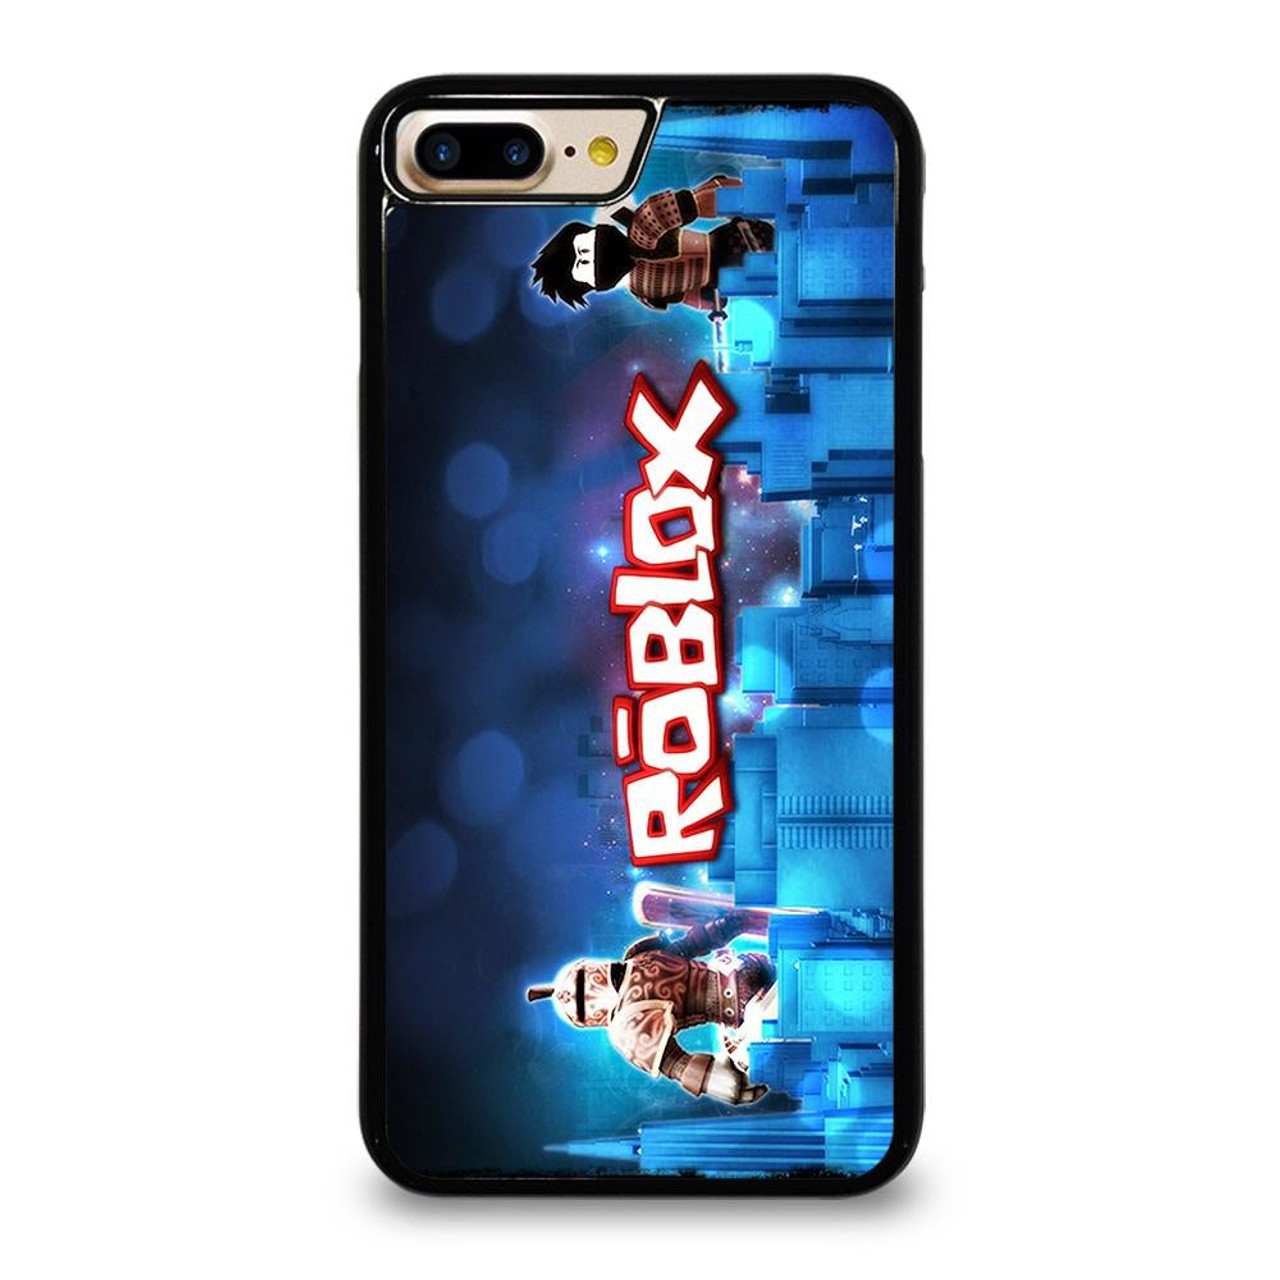 Roblox Oof Cell Phone Case Cover for Iphone5 5s,iphone 6,Iphone 7  Plus,Iphone 8,phone X,Samsung Galaxy S Series/S6 Edge/S8 Plue/S9/S9 Plue  ,Samsung Note Series